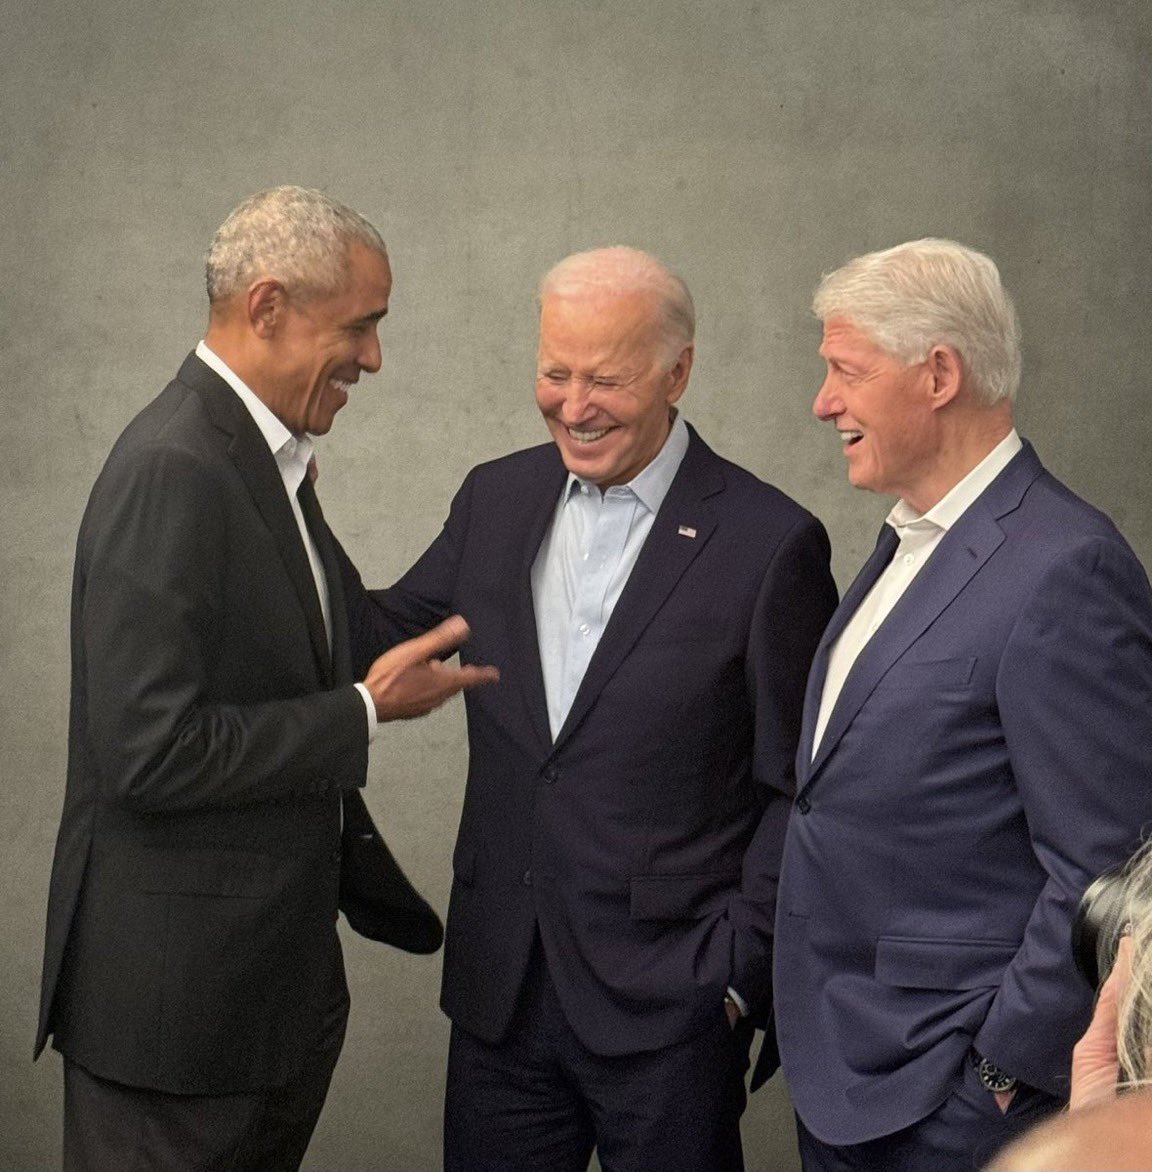 In a show of force & unity, the two living (and able) Dem former Presidents, joined @JoeBiden last night. The wives were there too. Trump couldn’t get the one other former GOP POTUS -GWB- to show-up, if he kidnapped him. Hell, he can can’t even get his wife & daughter to show-up.